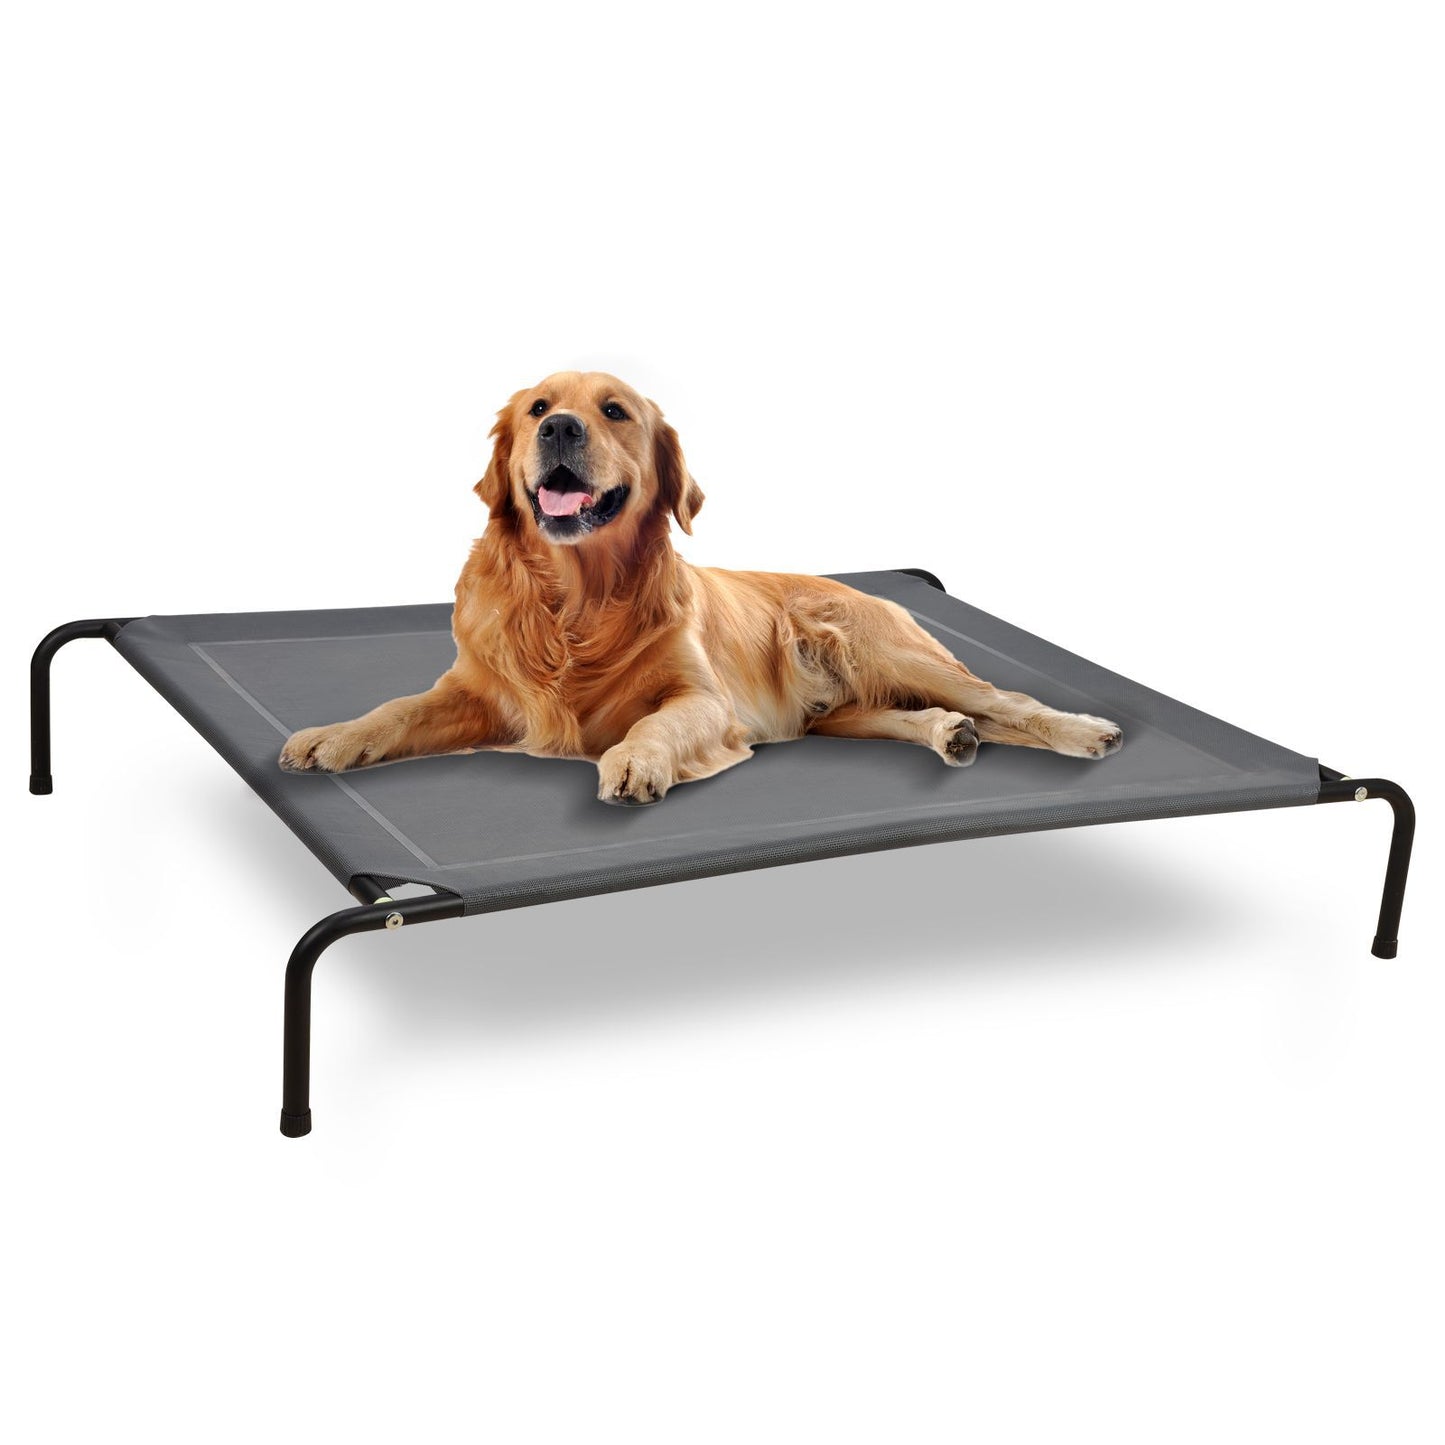 Cooling Elevated Pet Bed, Comfortable and Supportive Dog Hammock